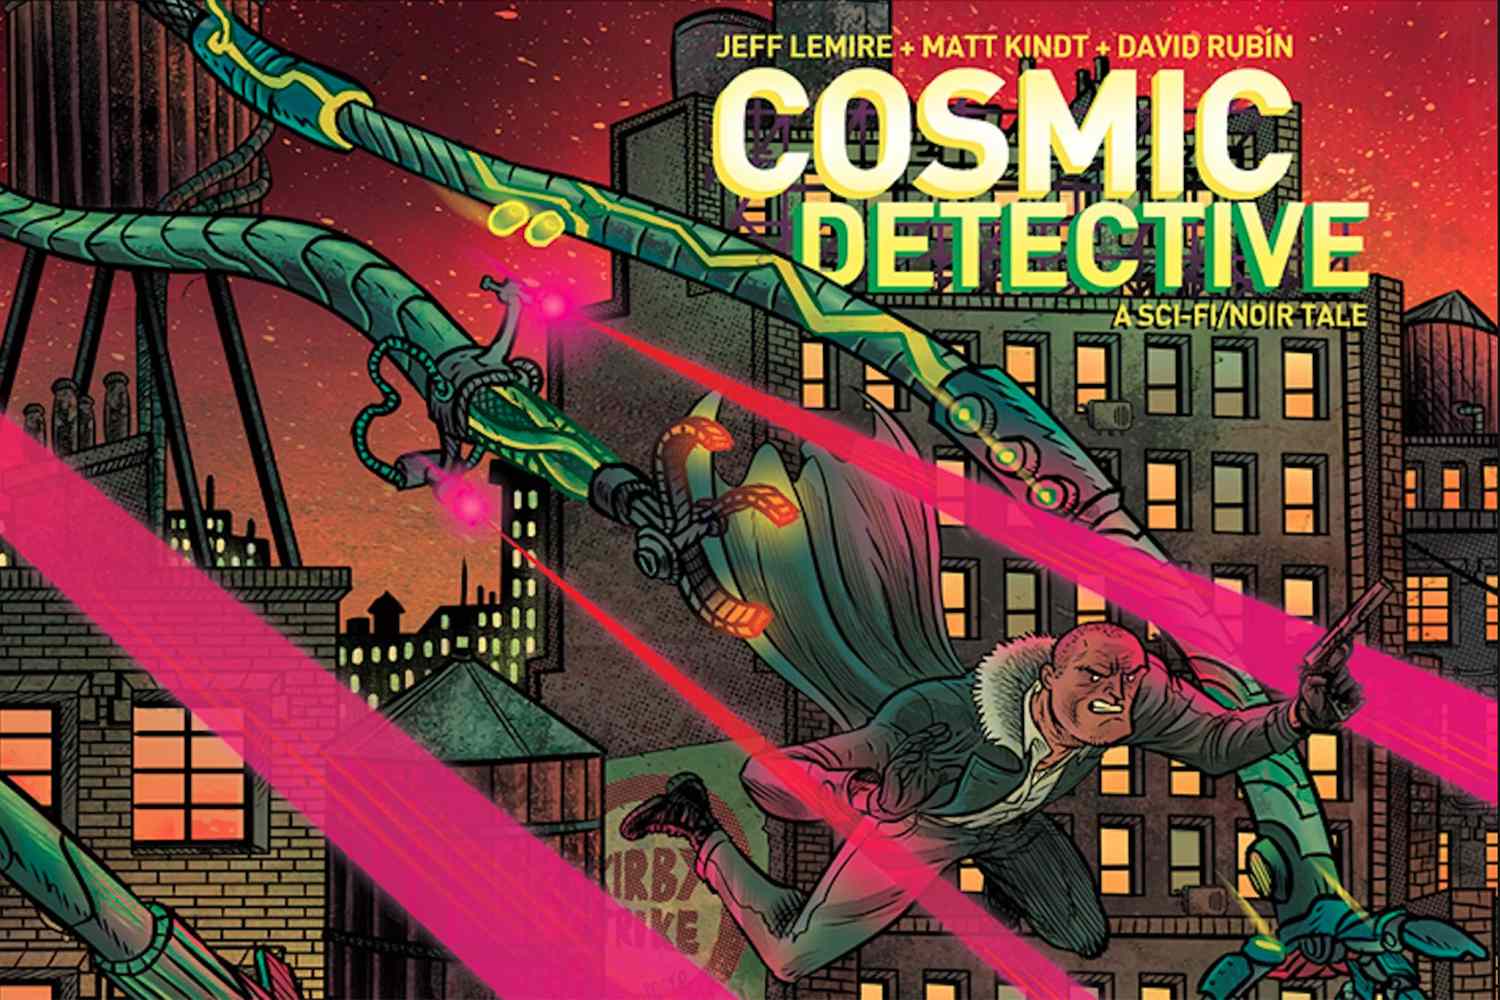 COSMIC DETECTIVE a graphic novel by Lemire, Kindt, Rubin